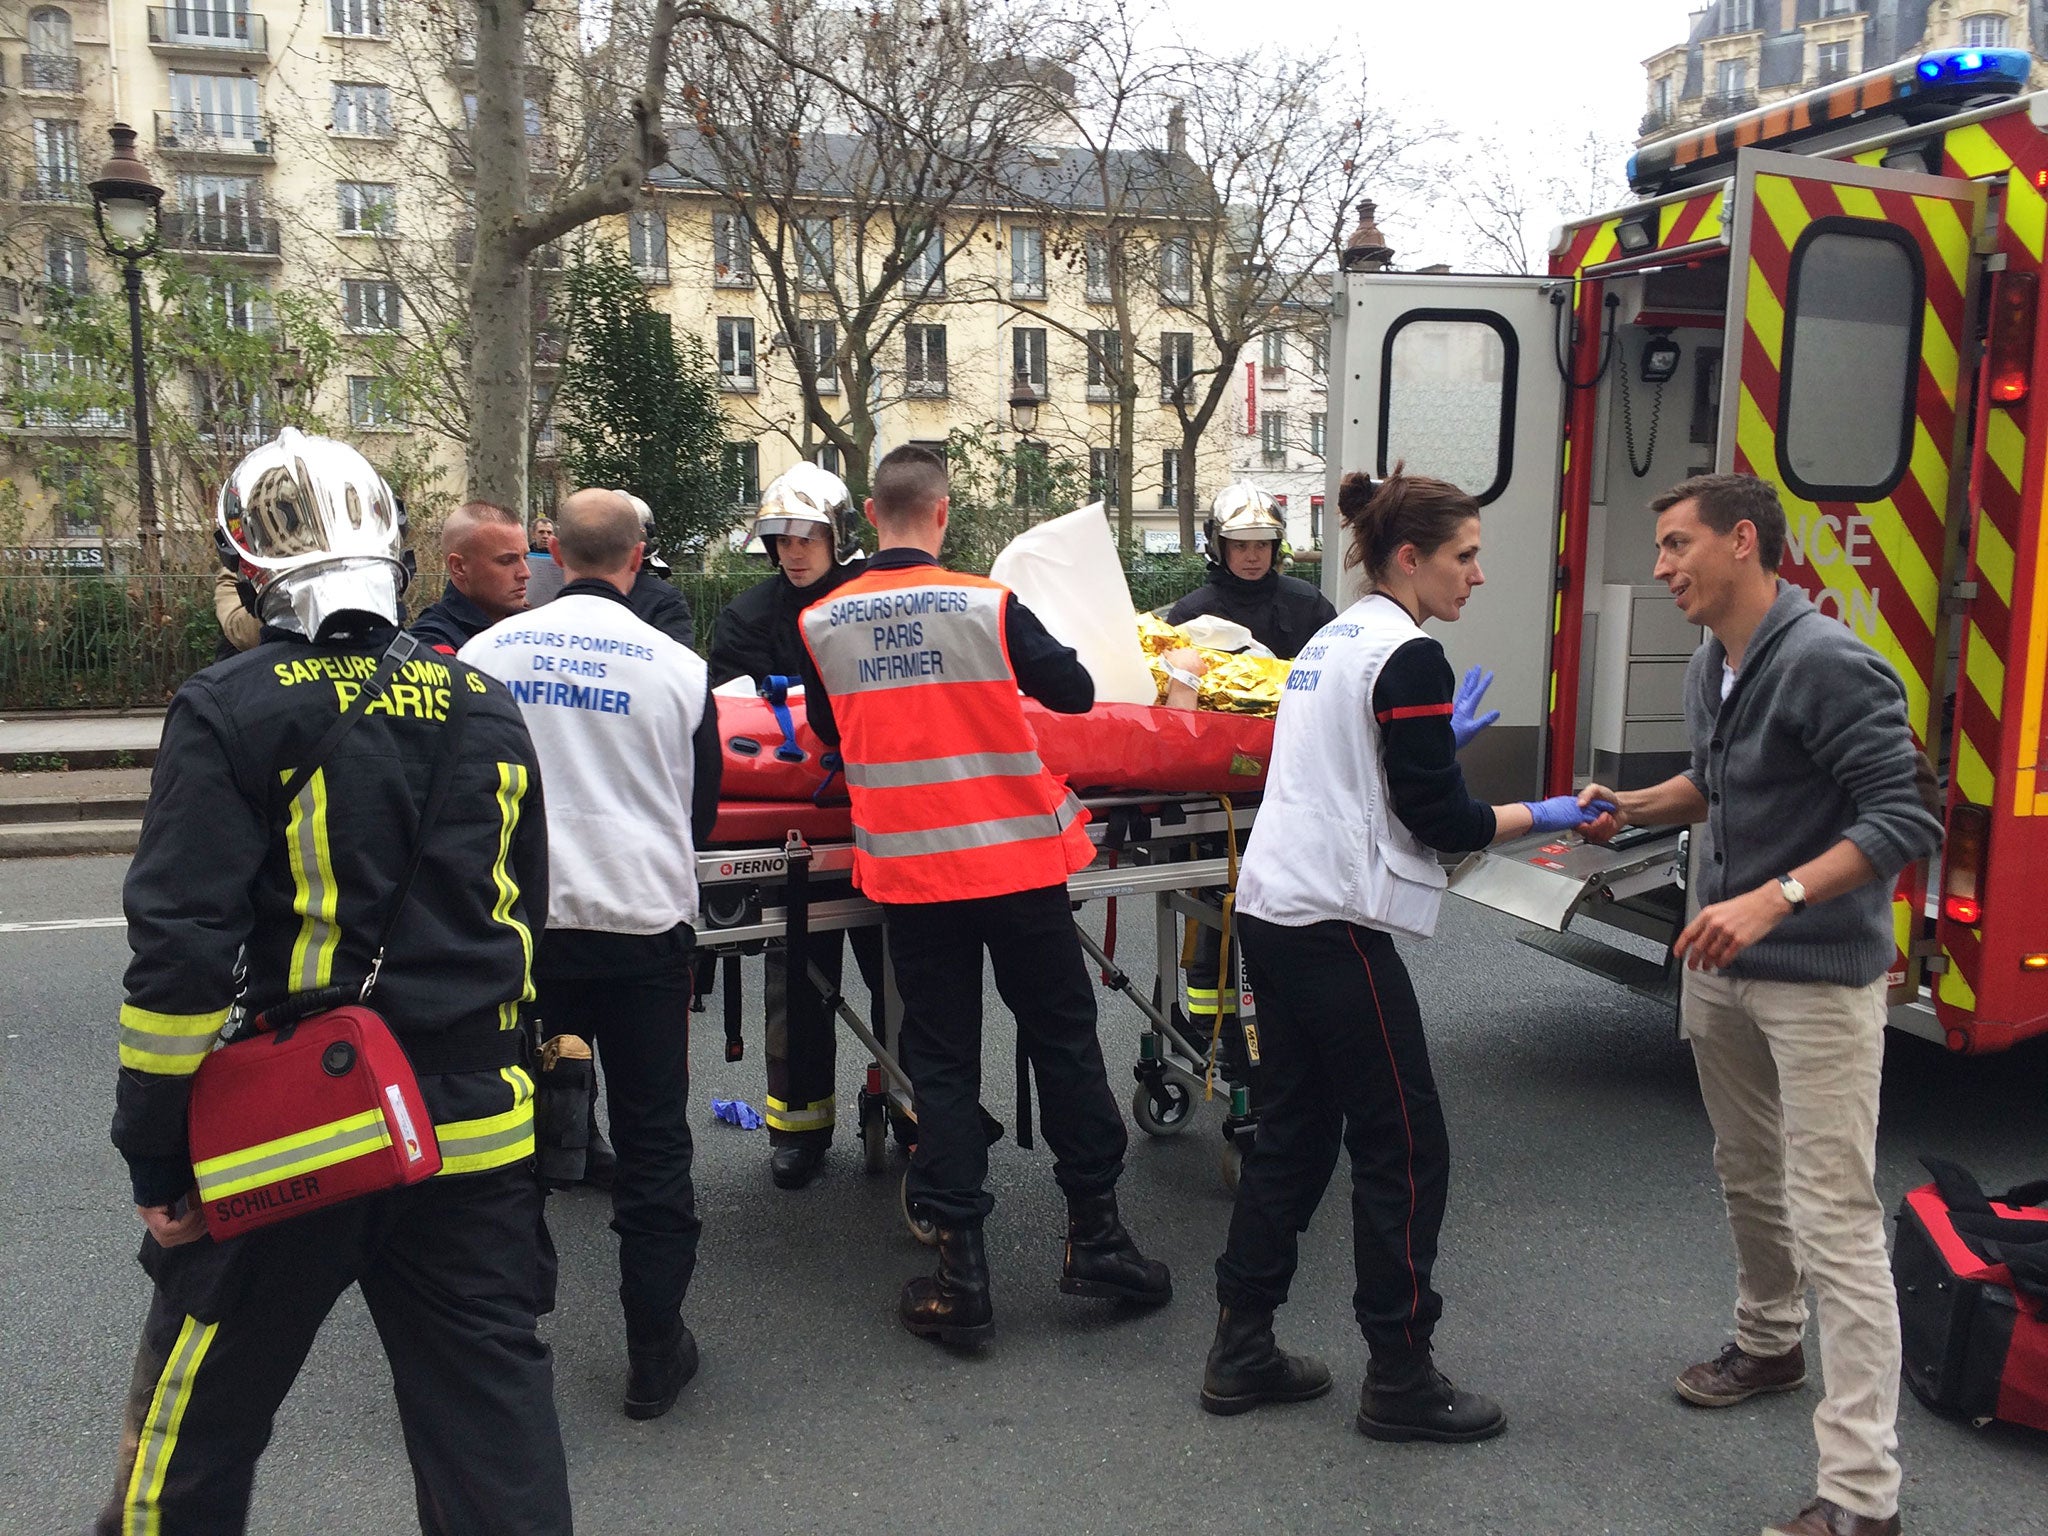 Firefighters carry an injured man on a stretcher in front of the offices of the French satirical newspaper Charlie Hebdo in Paris